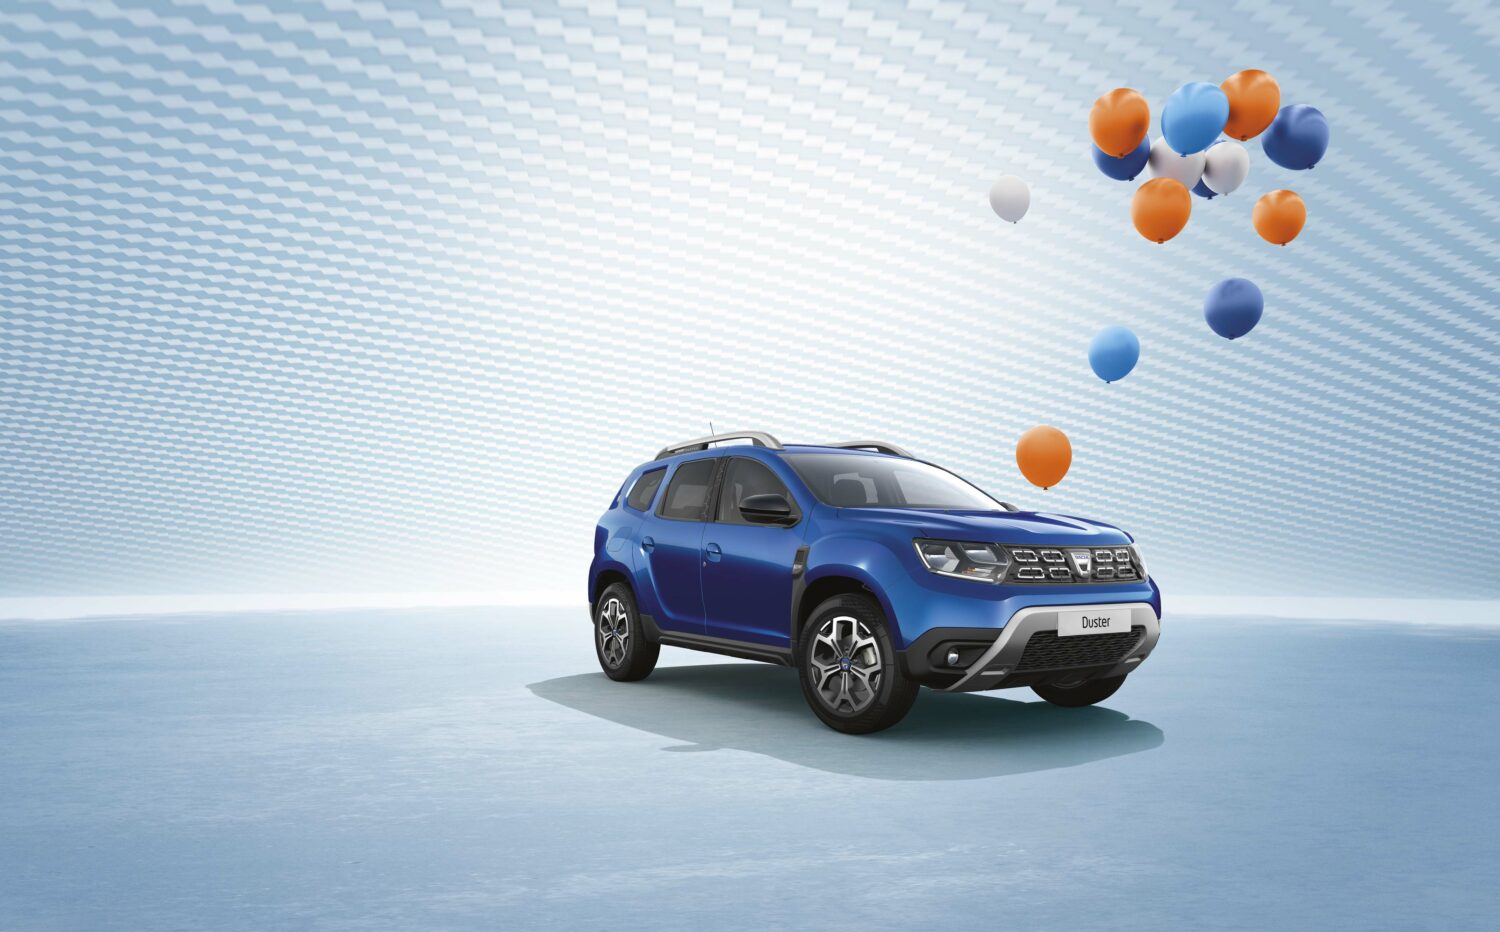 2020 - Anniversary Special series “Dacia 15 years”